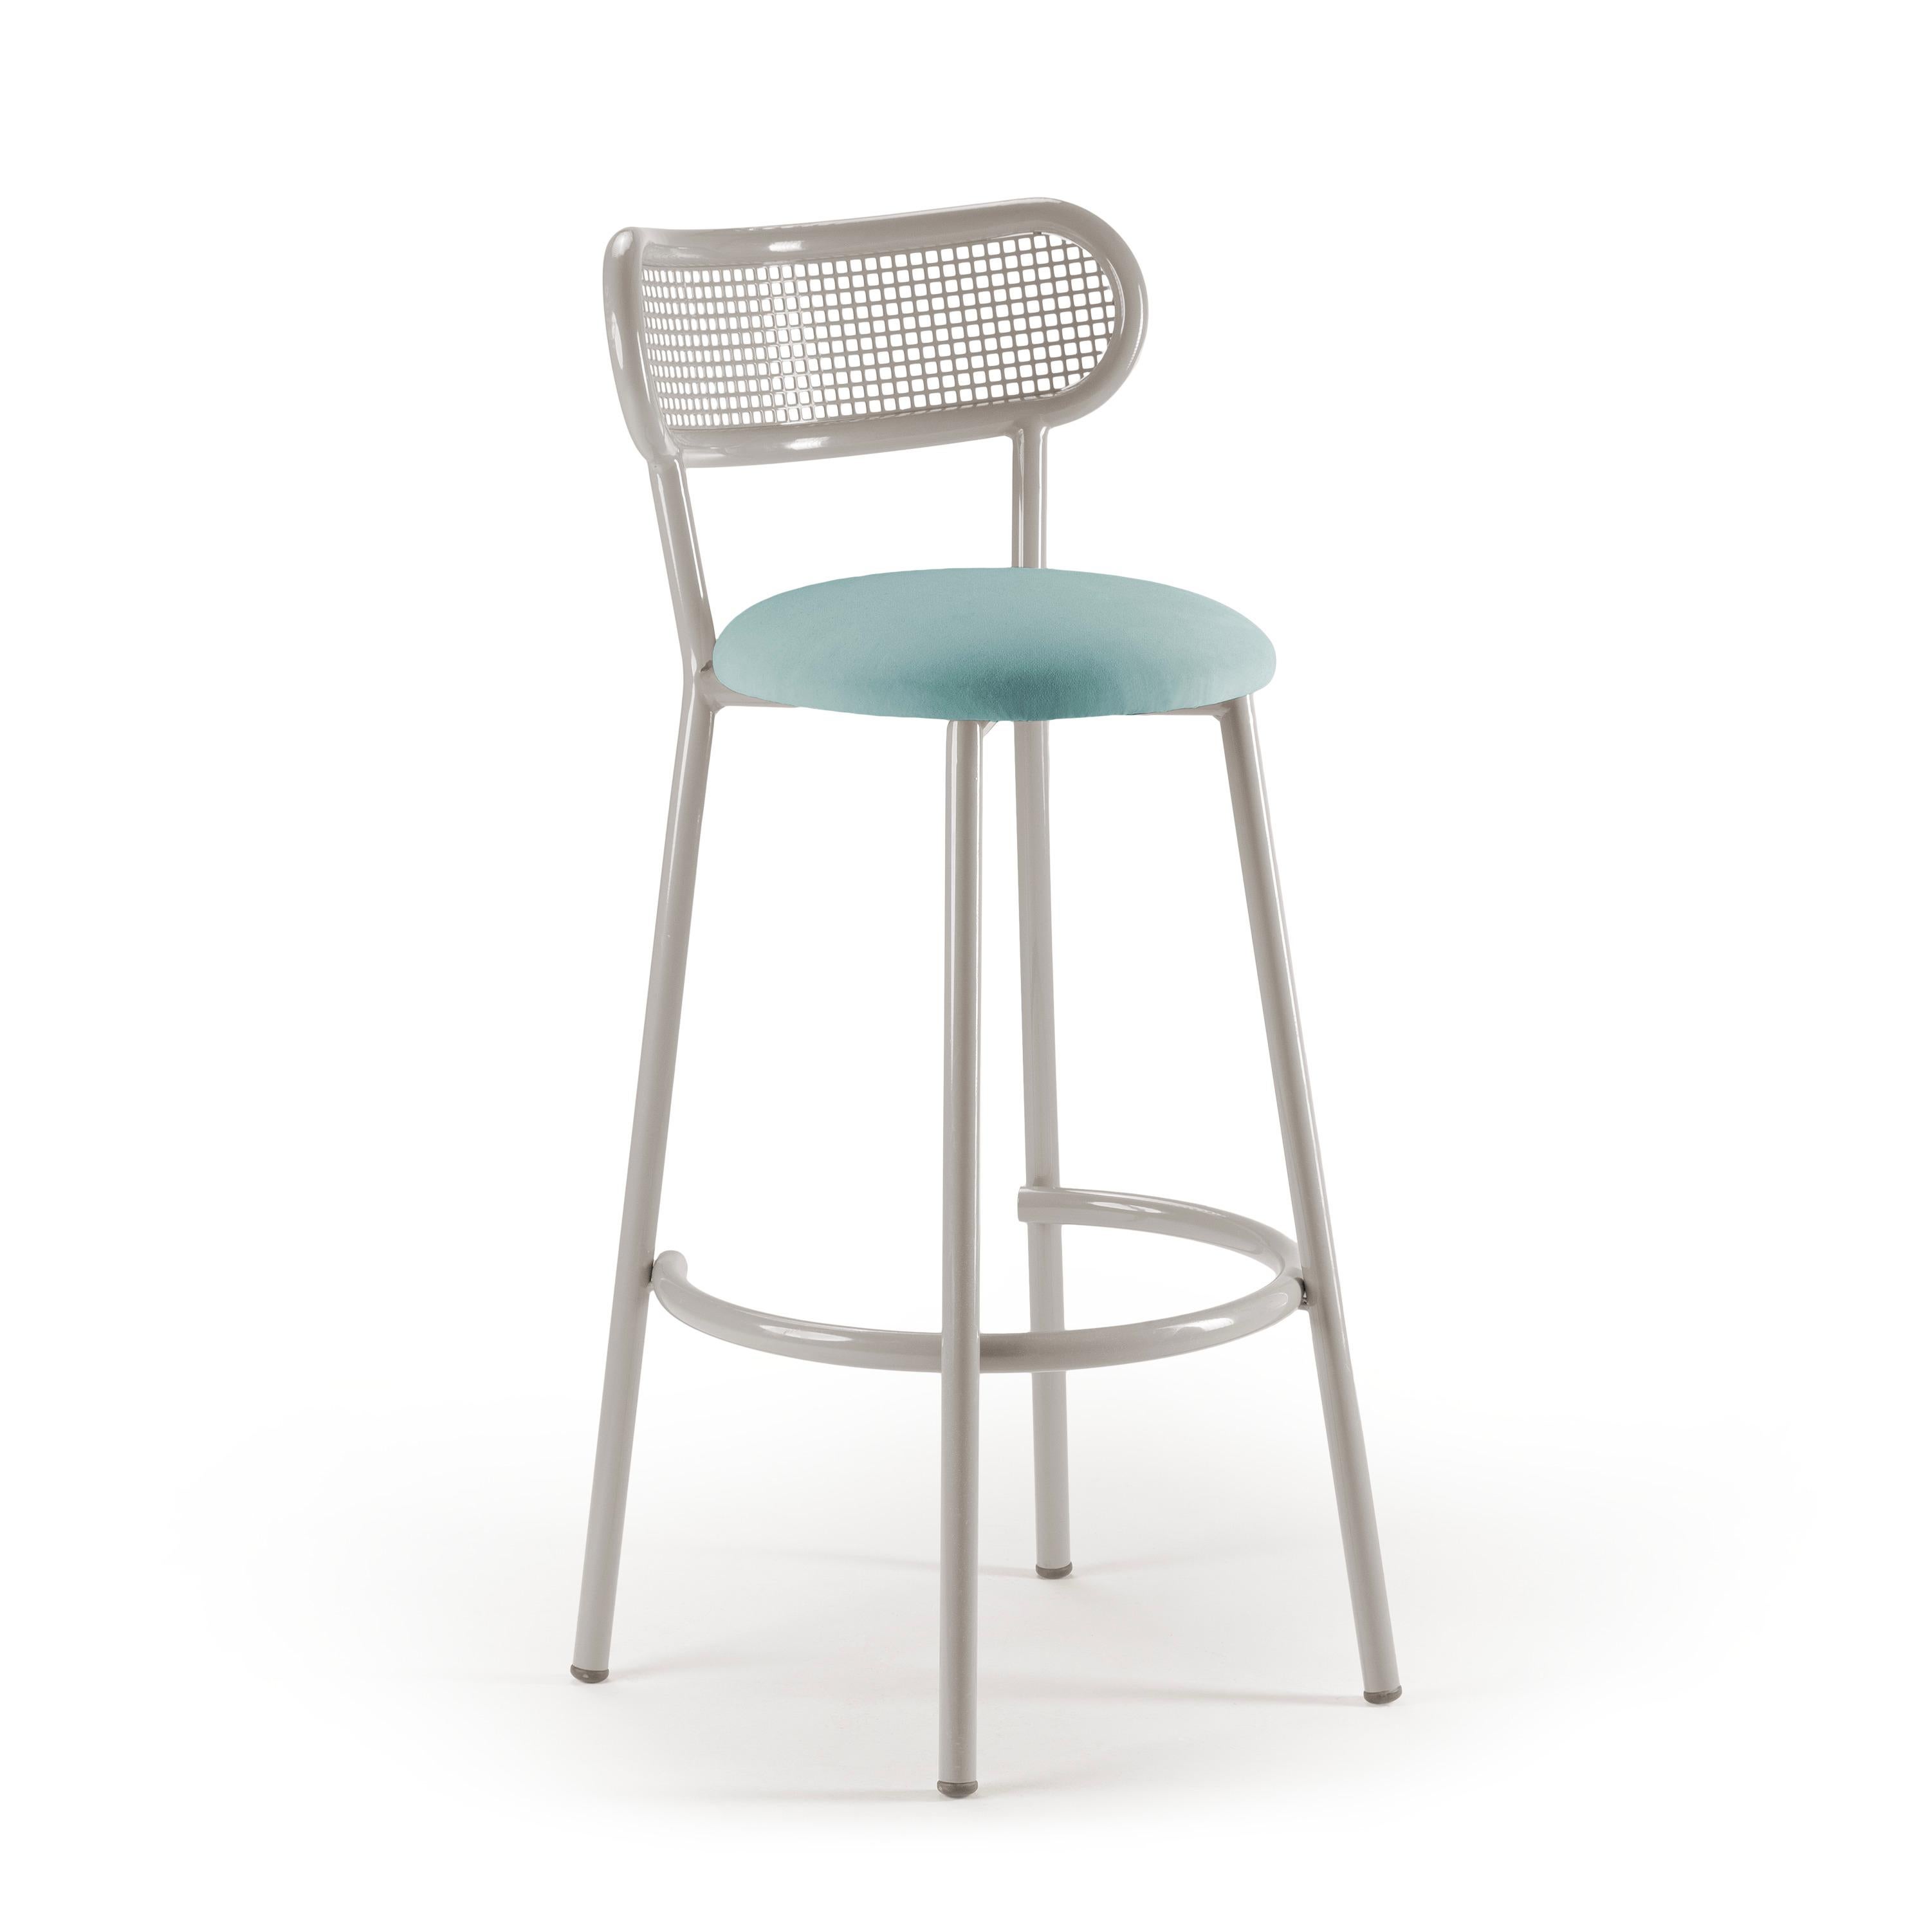 Portuguese Louise Bar Chair with Sage Steel Structure, Perforated Steel Back and Upholstery For Sale